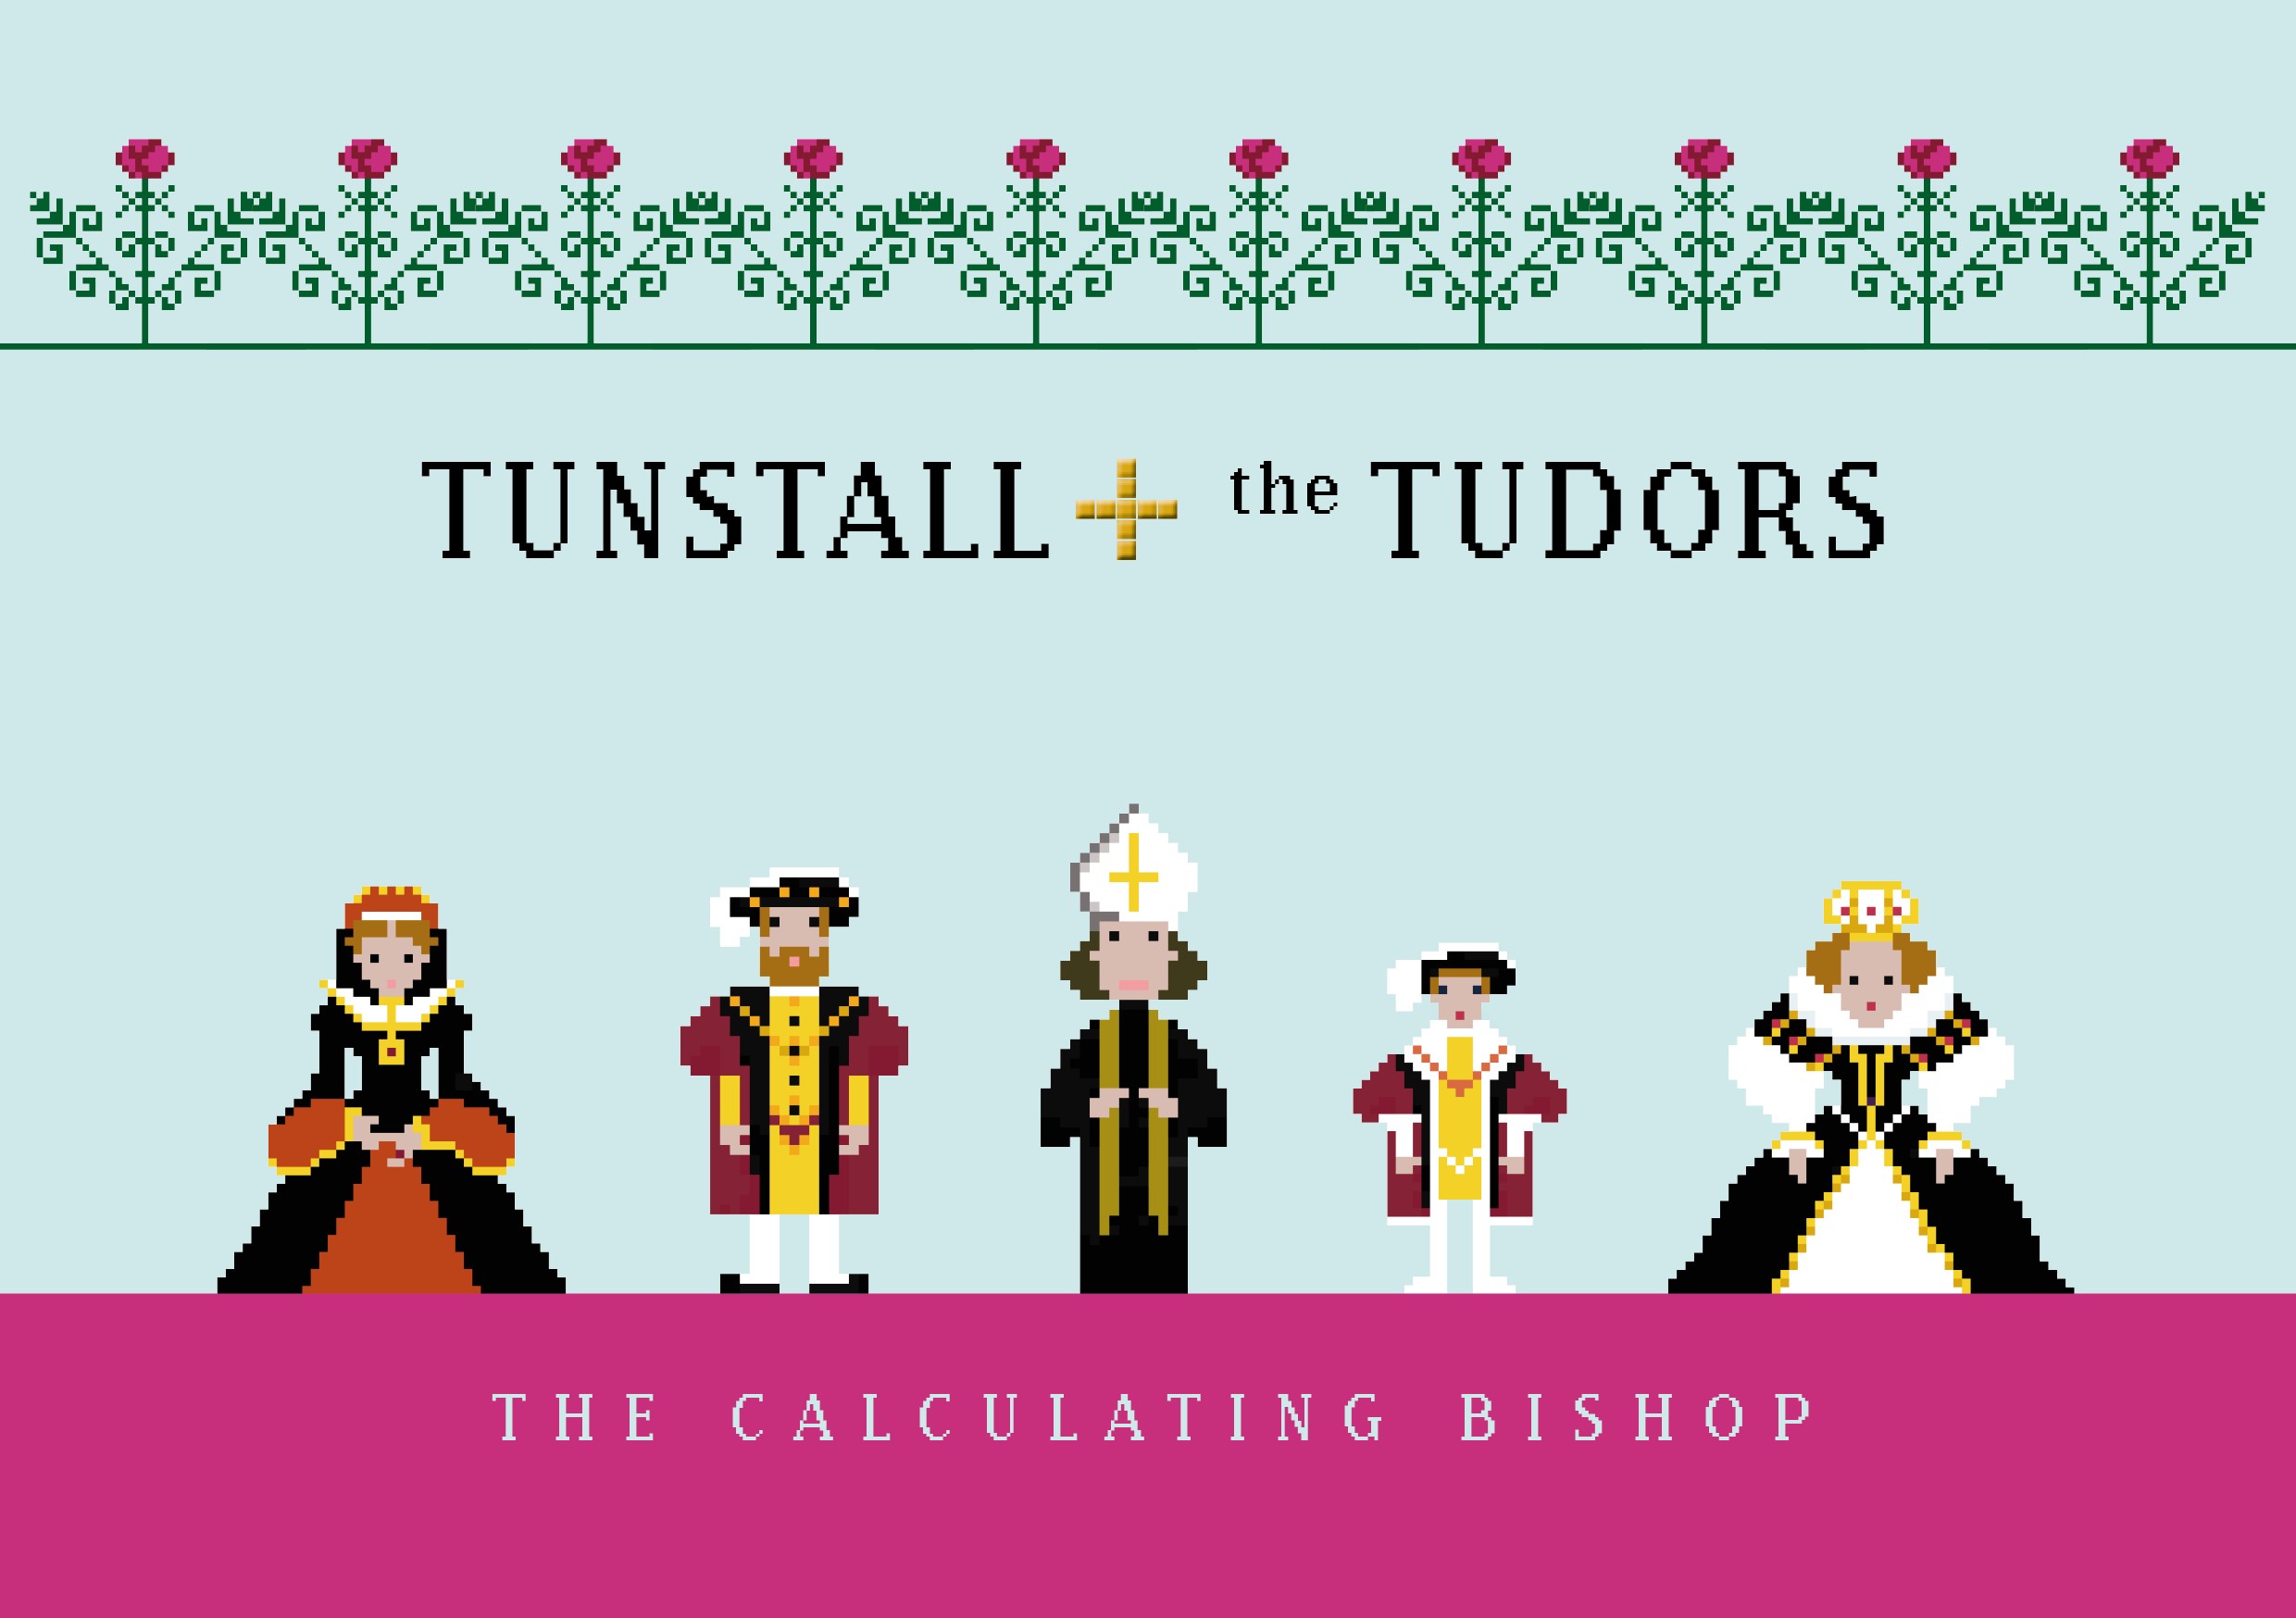 Cartoon of Bishop Tunstall at the centre, surrounded by Tudor monarchs.